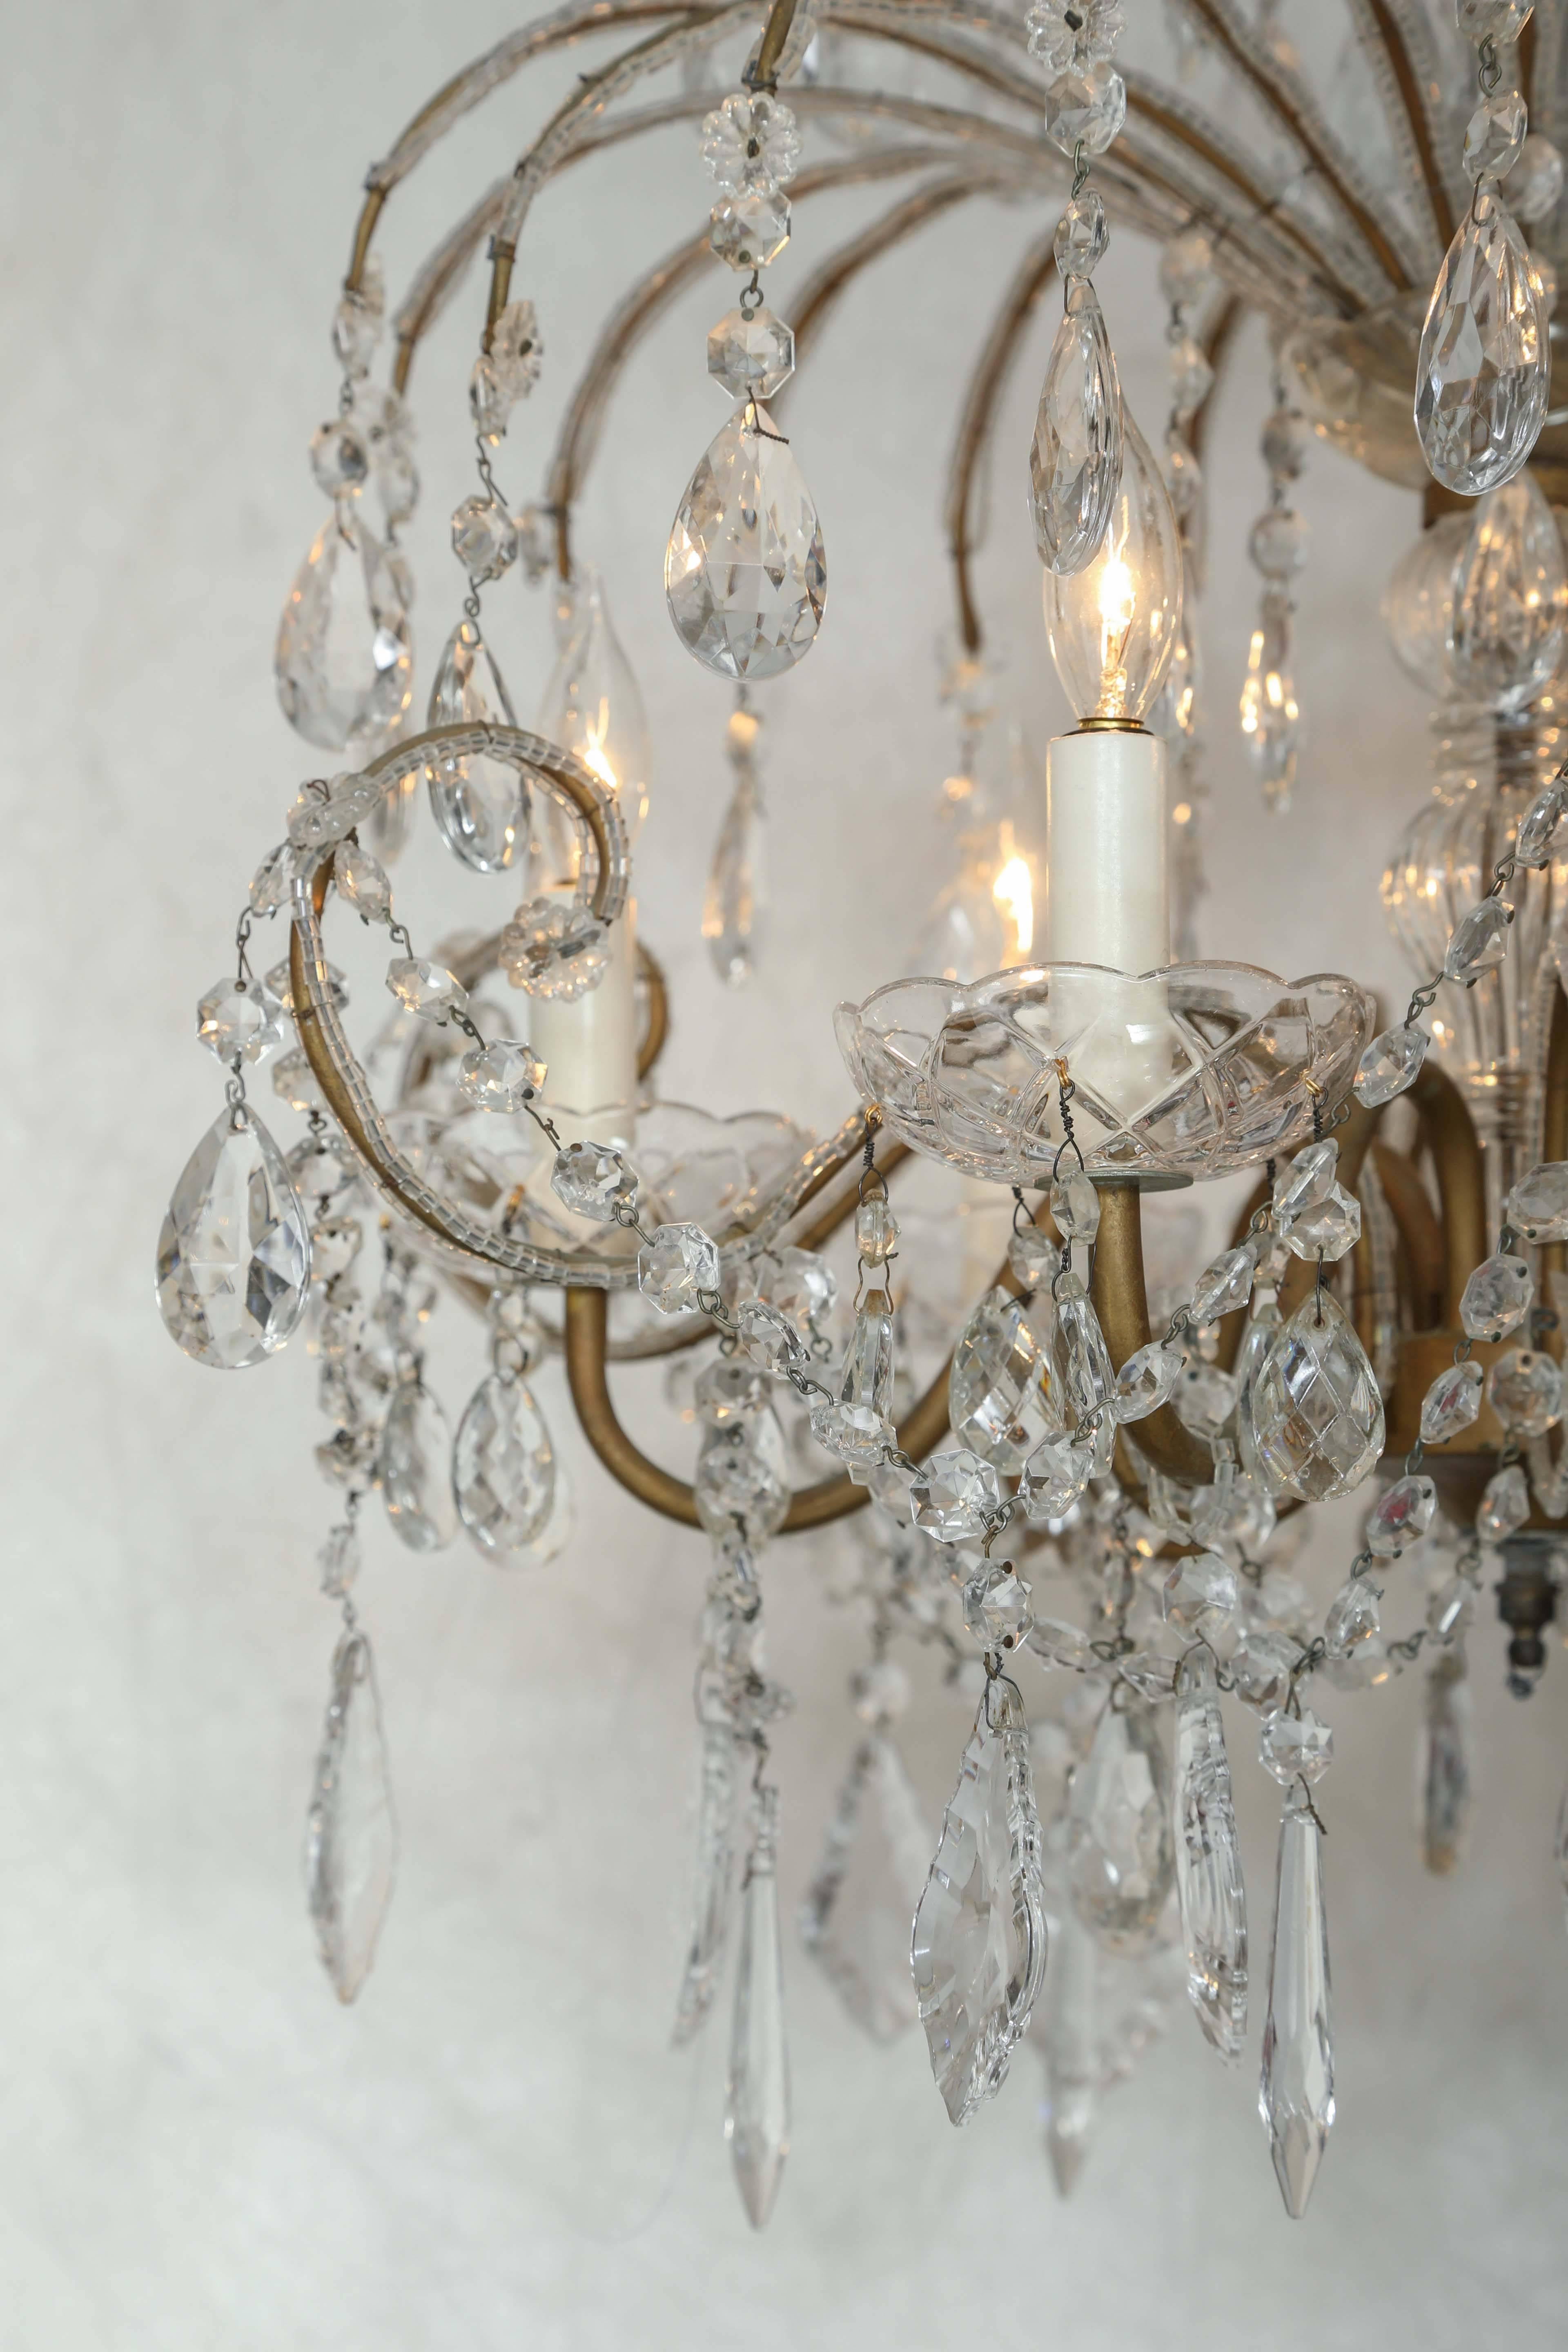 Chandelier, having a gilded iron frame encrusted with crystal beads, with six S-scroll candle arms, surmounted by three graduated tiers, ending in faceted drops, the entire fixture draped with swags of crystal strings.

Stock ID: D9383